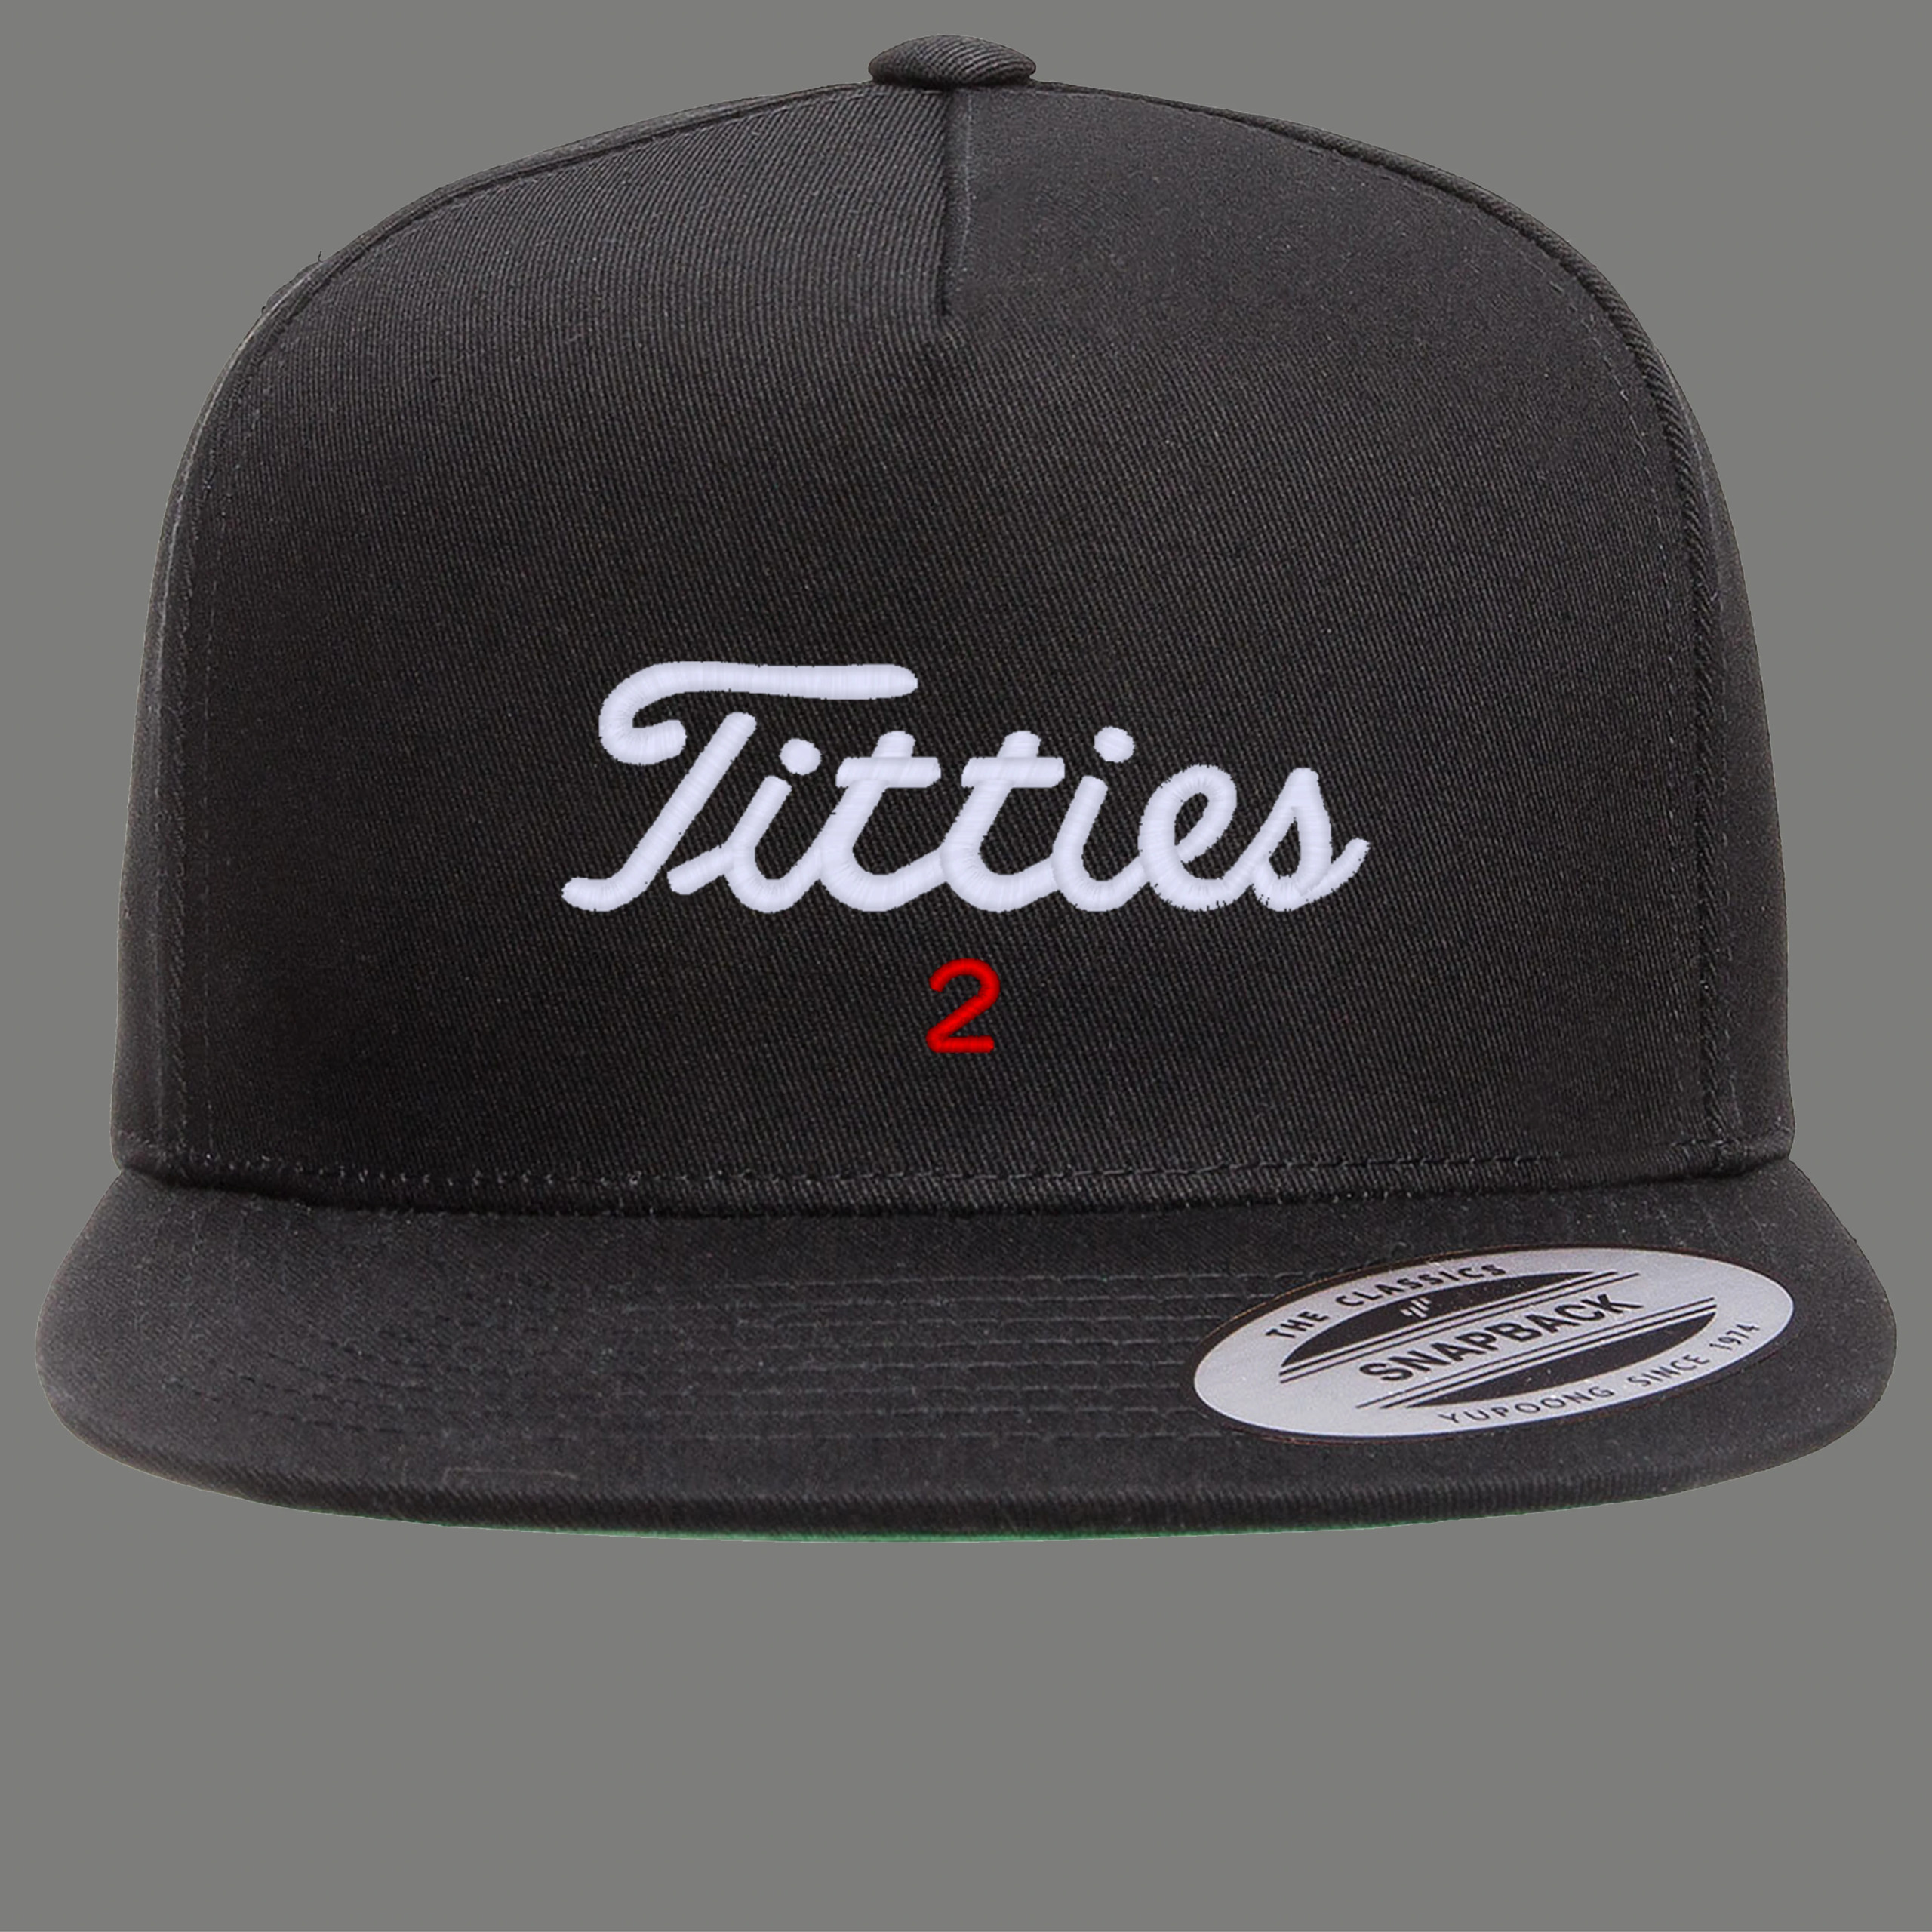 https://oldskoolshirts.com/wp-content/uploads/2021/05/products-FF6007Black_Titties_hats-scaled.jpg